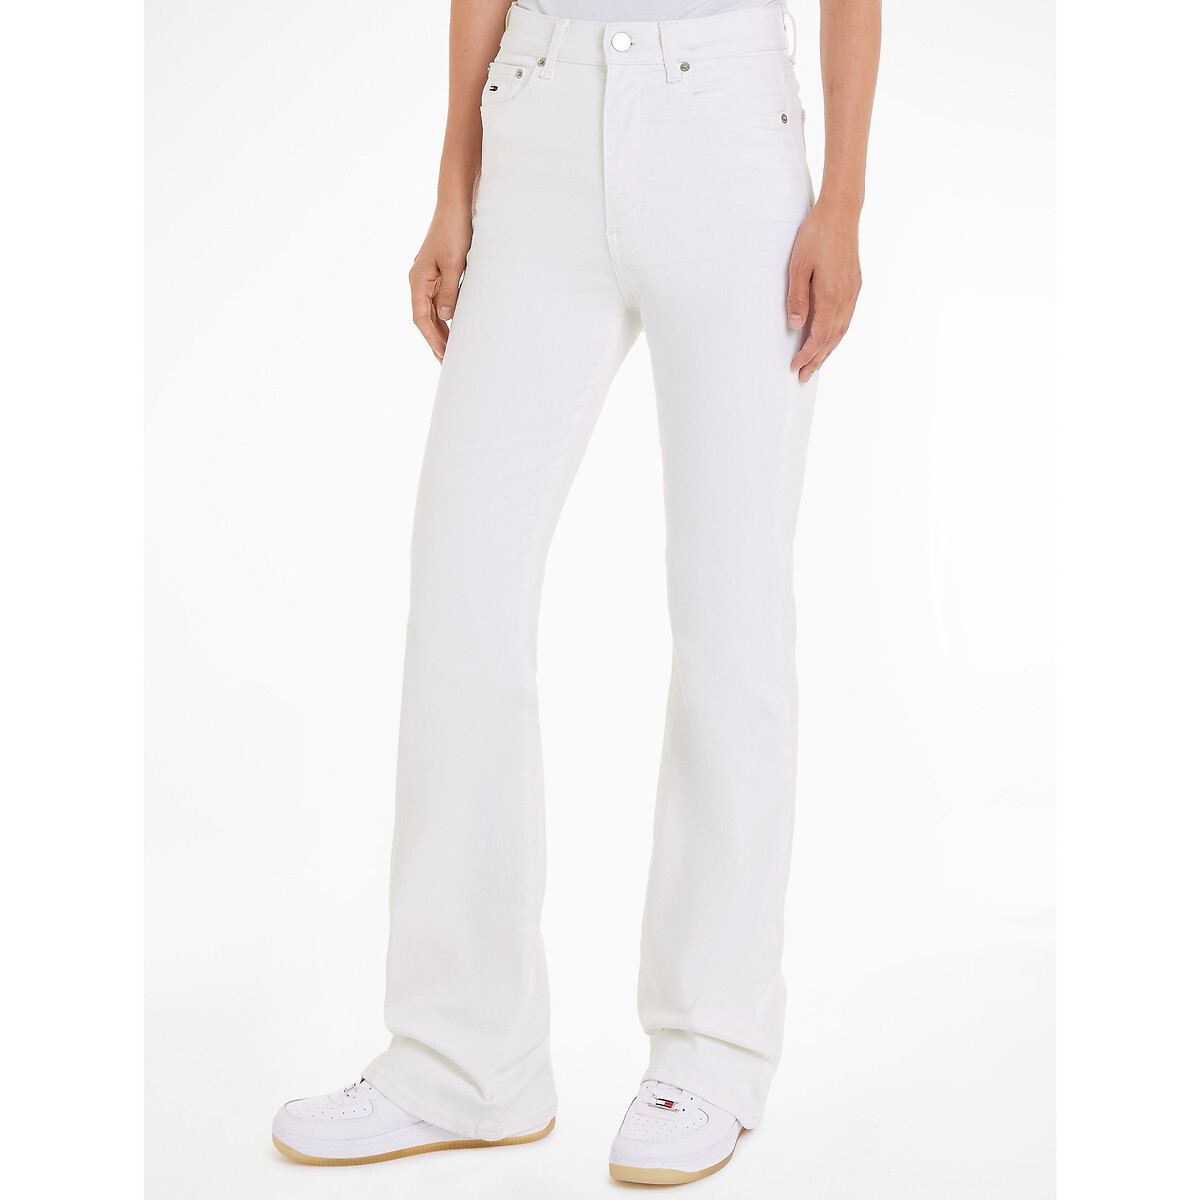 TOMMY JEANS Flare jeans, hoge taille